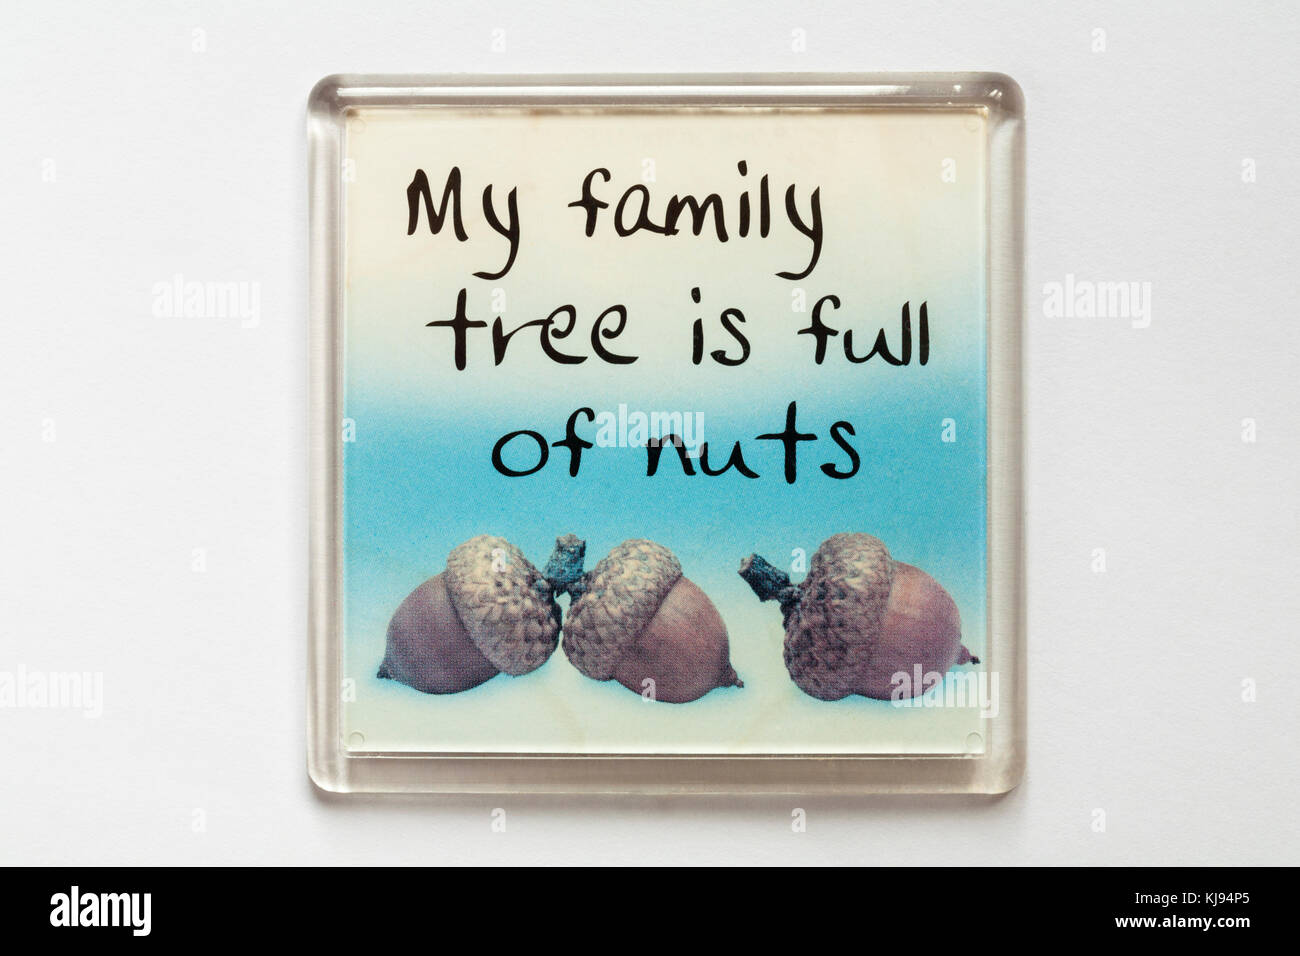 My family tree is full of nuts fridge magnet isolated on white background Stock Photo